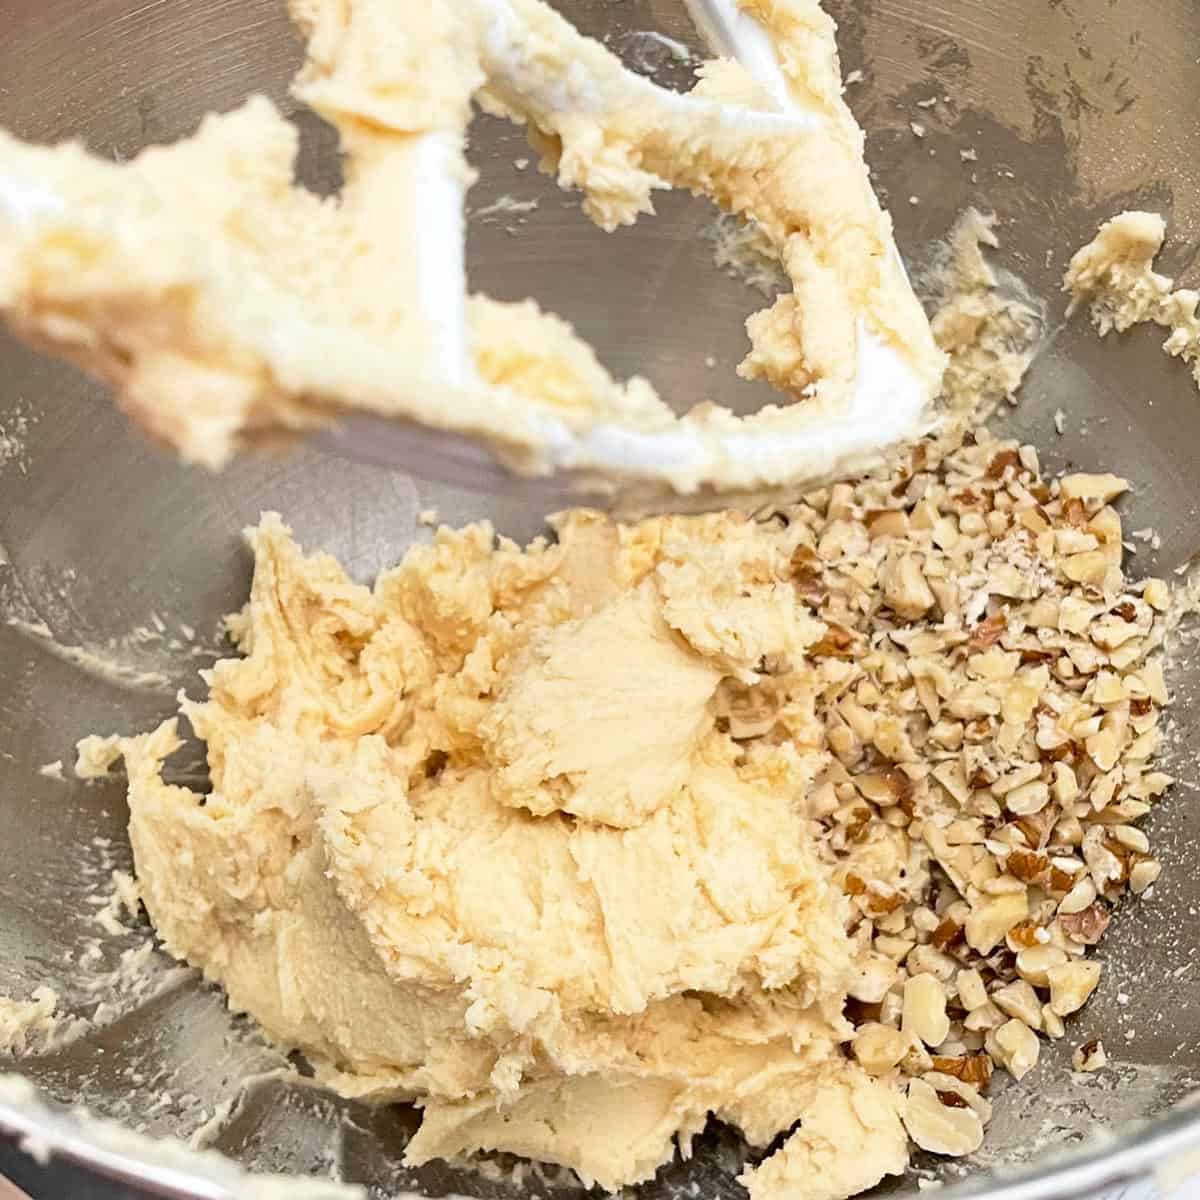 Adding black walnuts to the cookie dough in the mixer bowl.